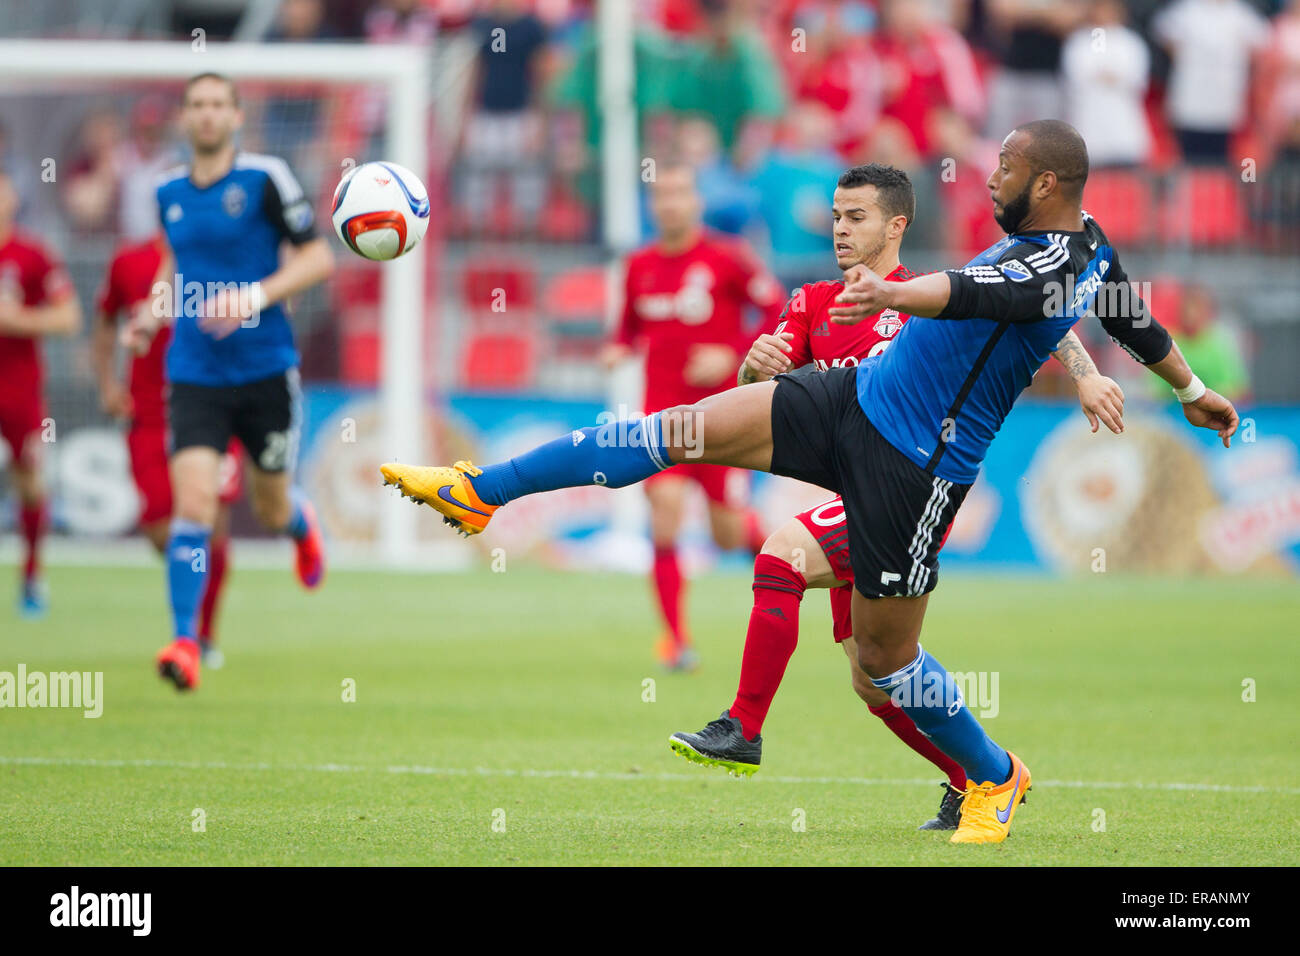 Toronto, Ontario, Canada. 30th May, 2015. Victor Bernardez (5) of the Earthquakes clears the ball during a MLS game between the Toronto FC and San Jose Earthquakes at BMO field in Toronto, ON. Credit:  csm/Alamy Live News Stock Photo